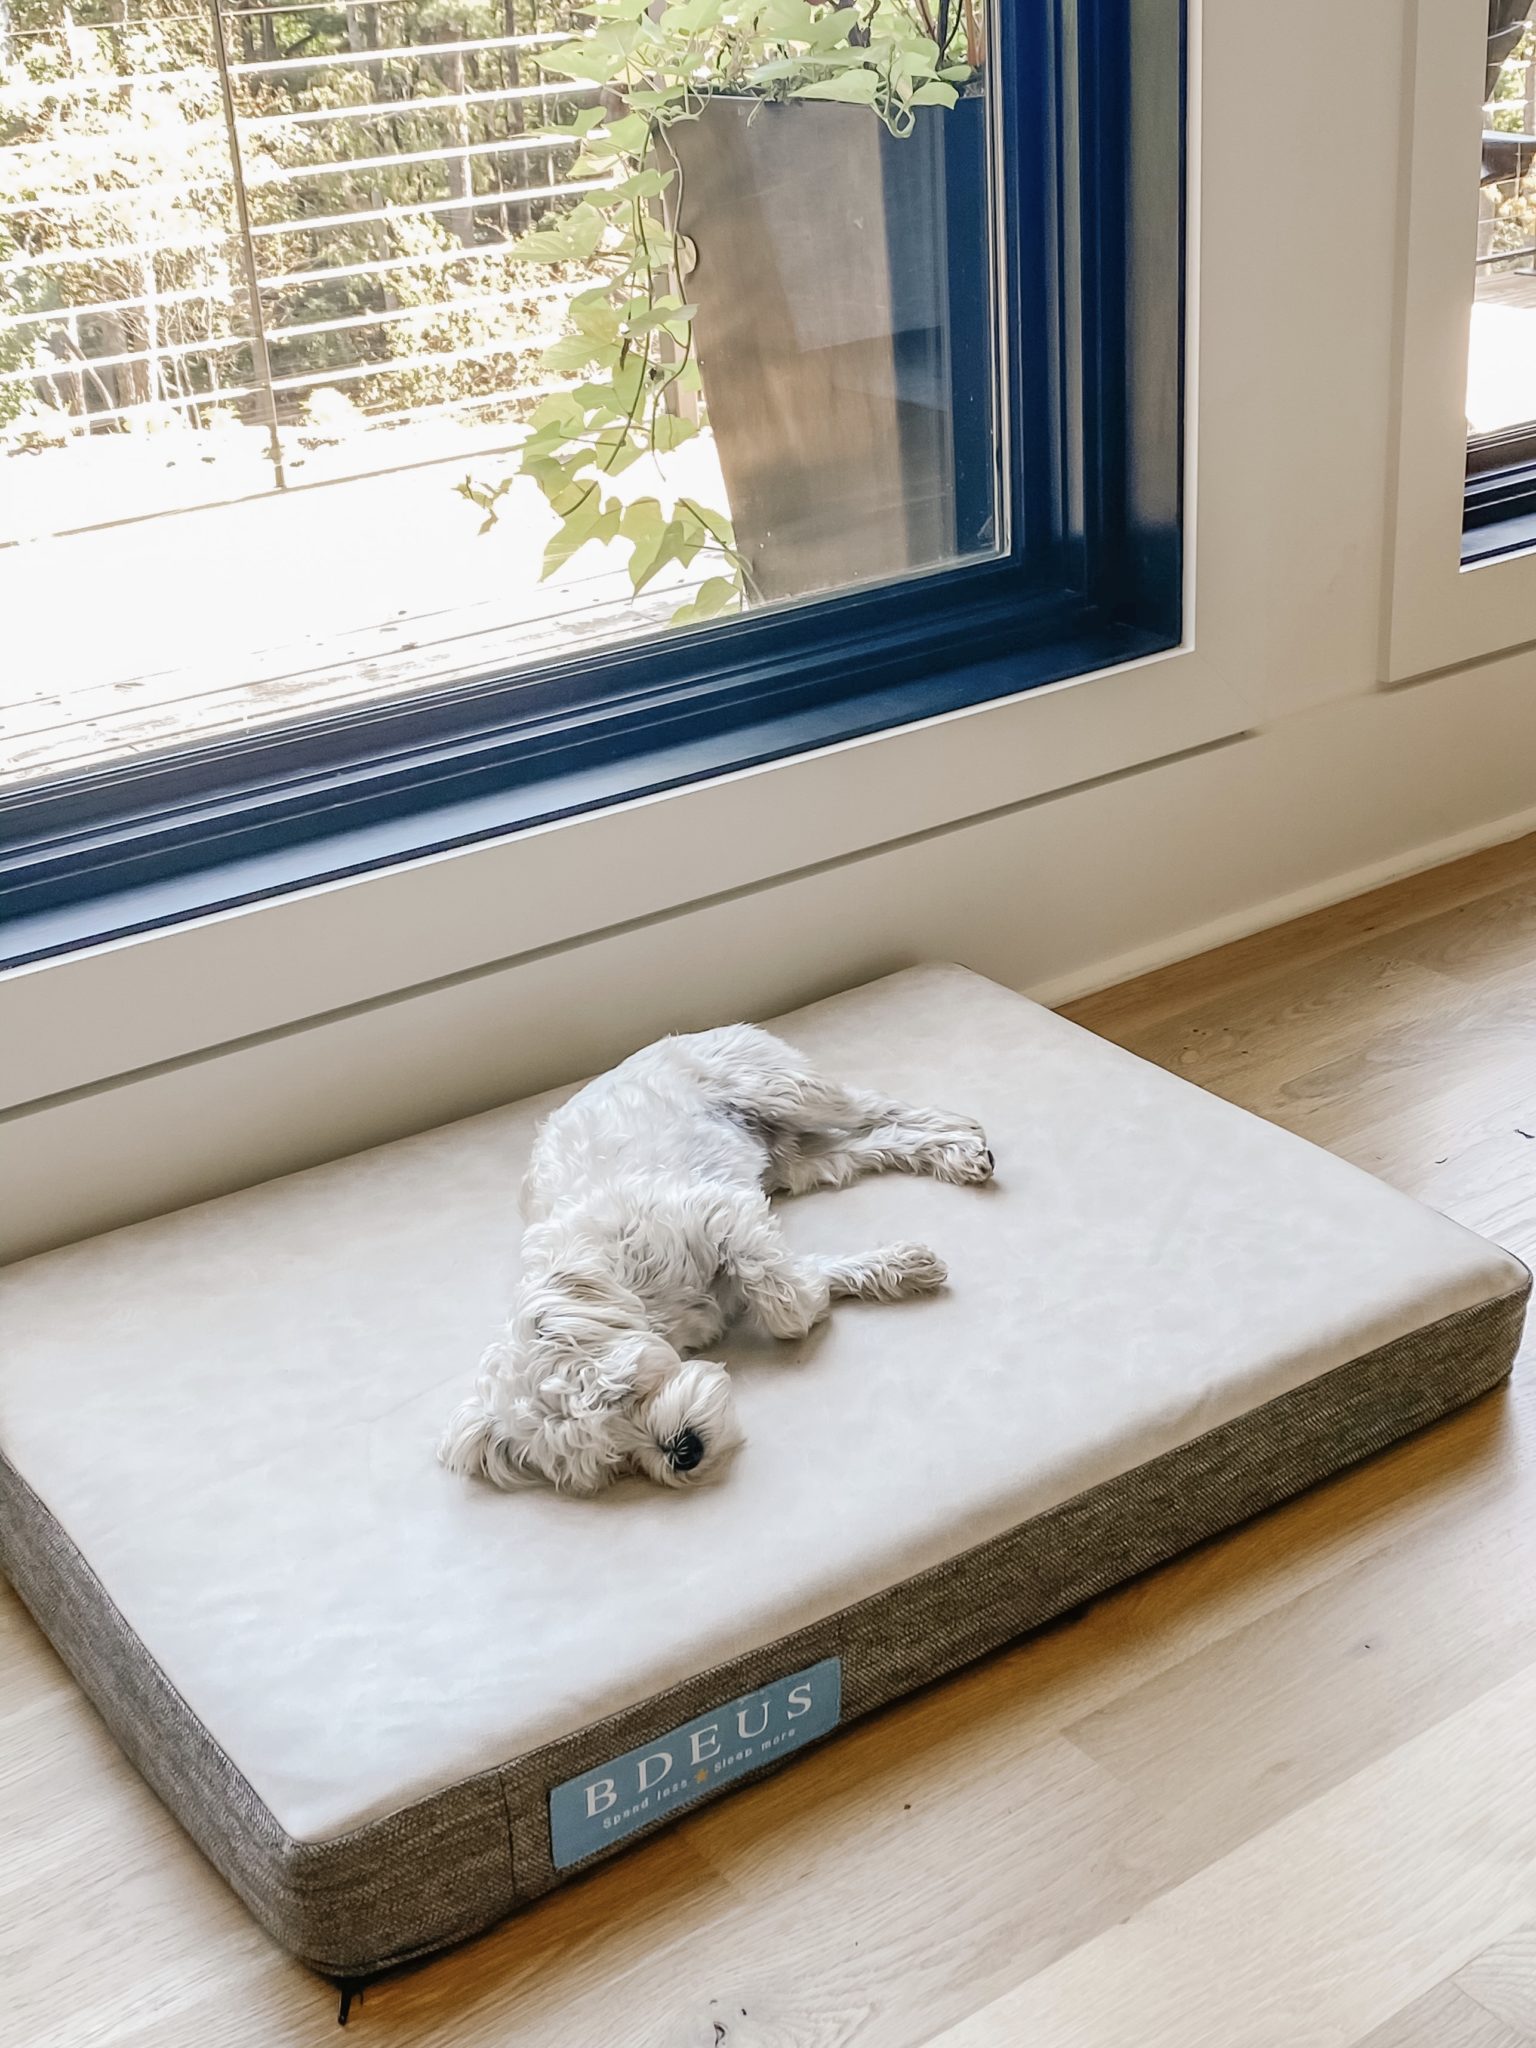 BDEUS memory foam, waterproof and cooling dog bed